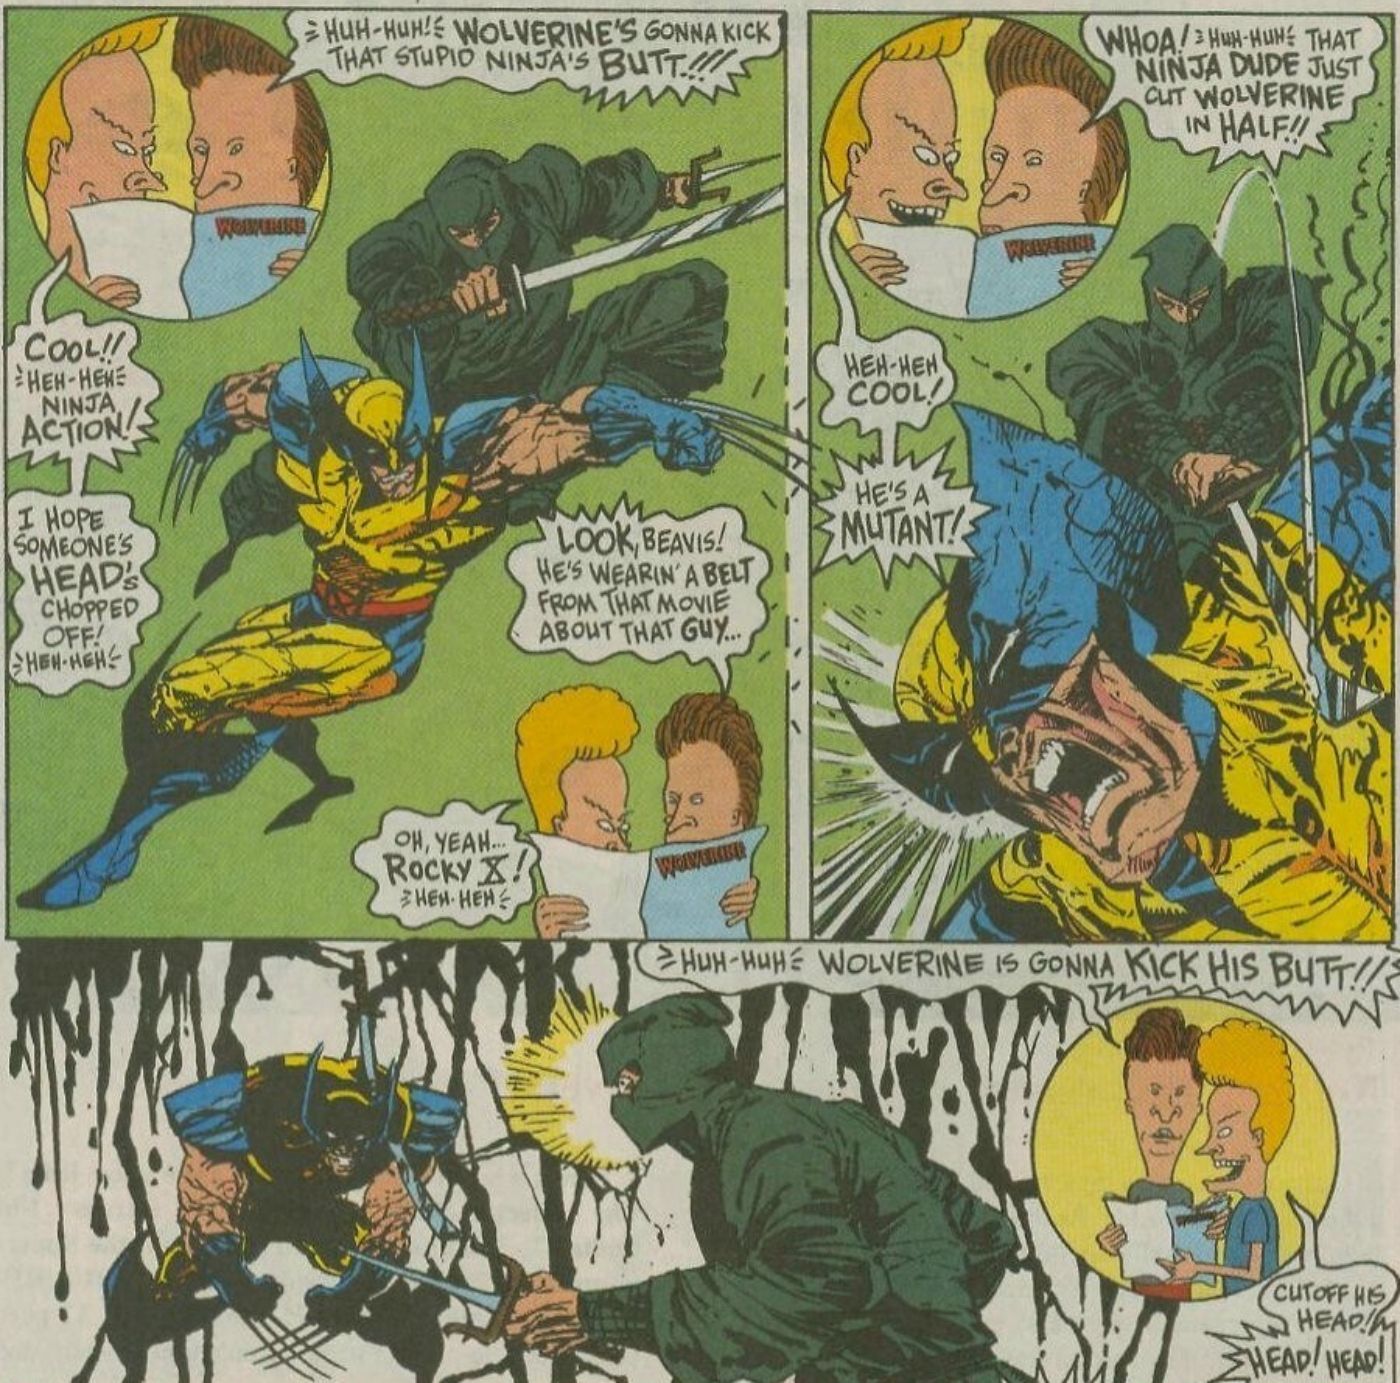 Beavis and Butt-Head cheering on Wolverine as he's fighting a ninja.